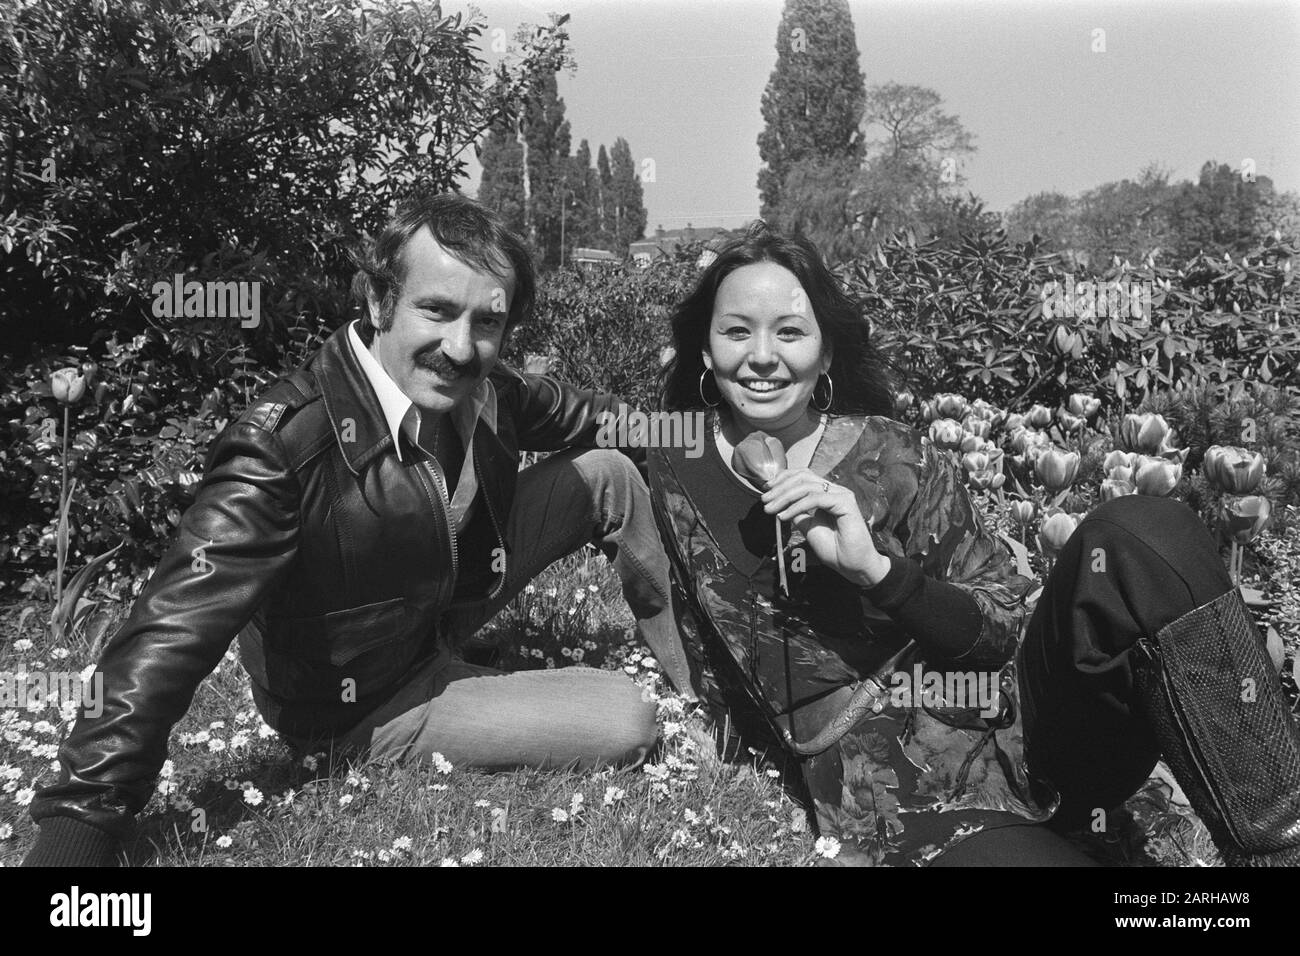 Yvonne Elliman (singer) and producer Robert Stigwood Date: May 18, 1977 Keywords: producers, singers Personal name: Elliman, Yvonne, Stigwood, Robert Stock Photo